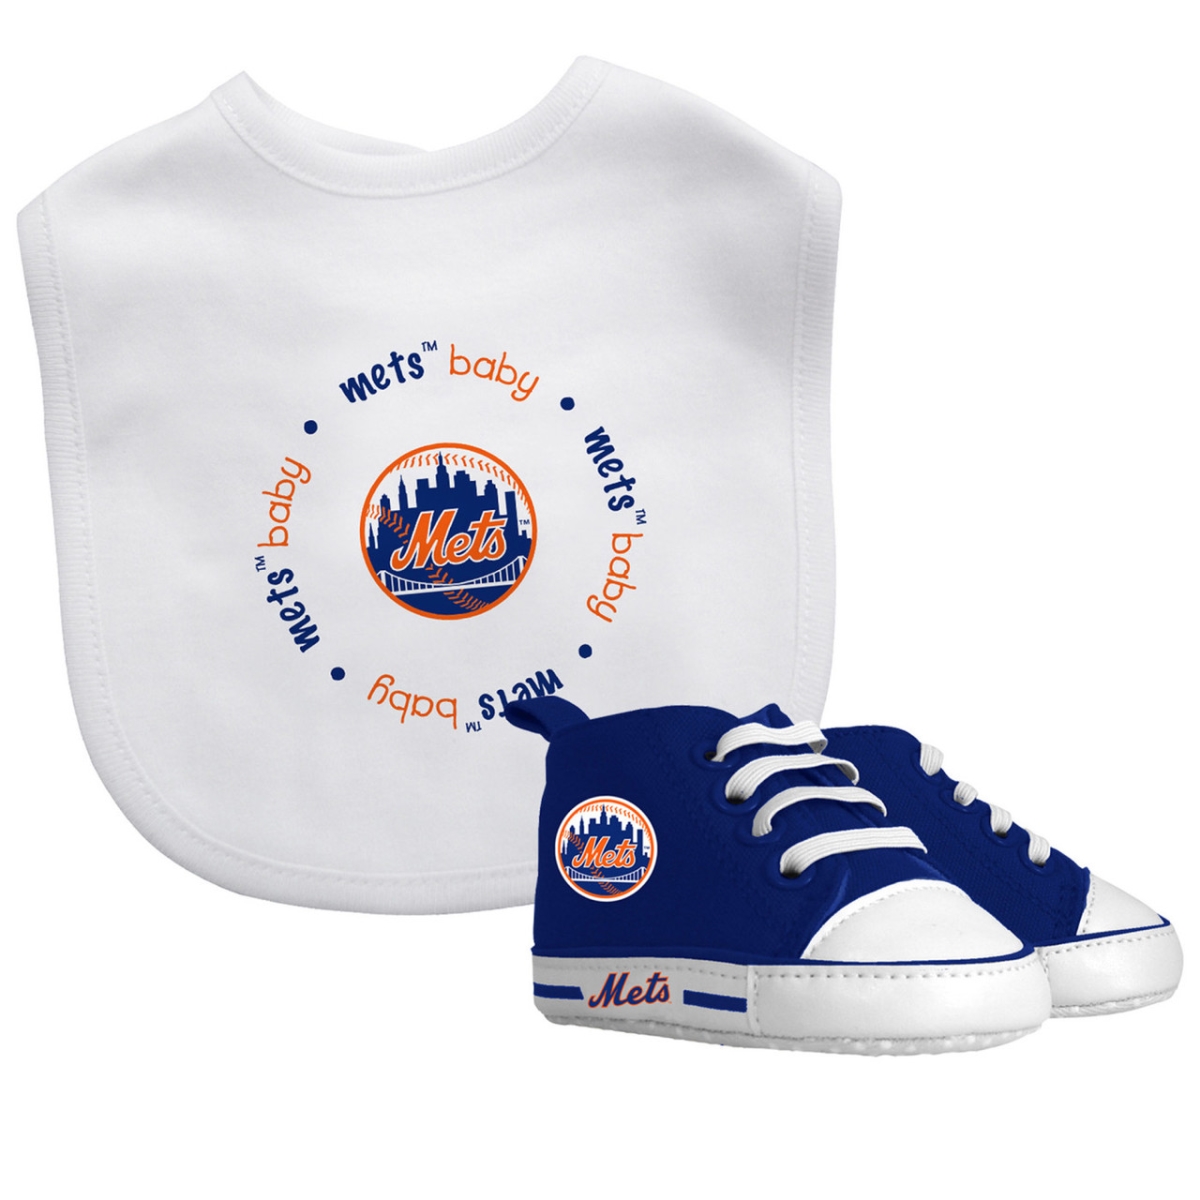 Picture of Masterpiece NYM2020 MLB New York Mets Gift Set - 2 Piece